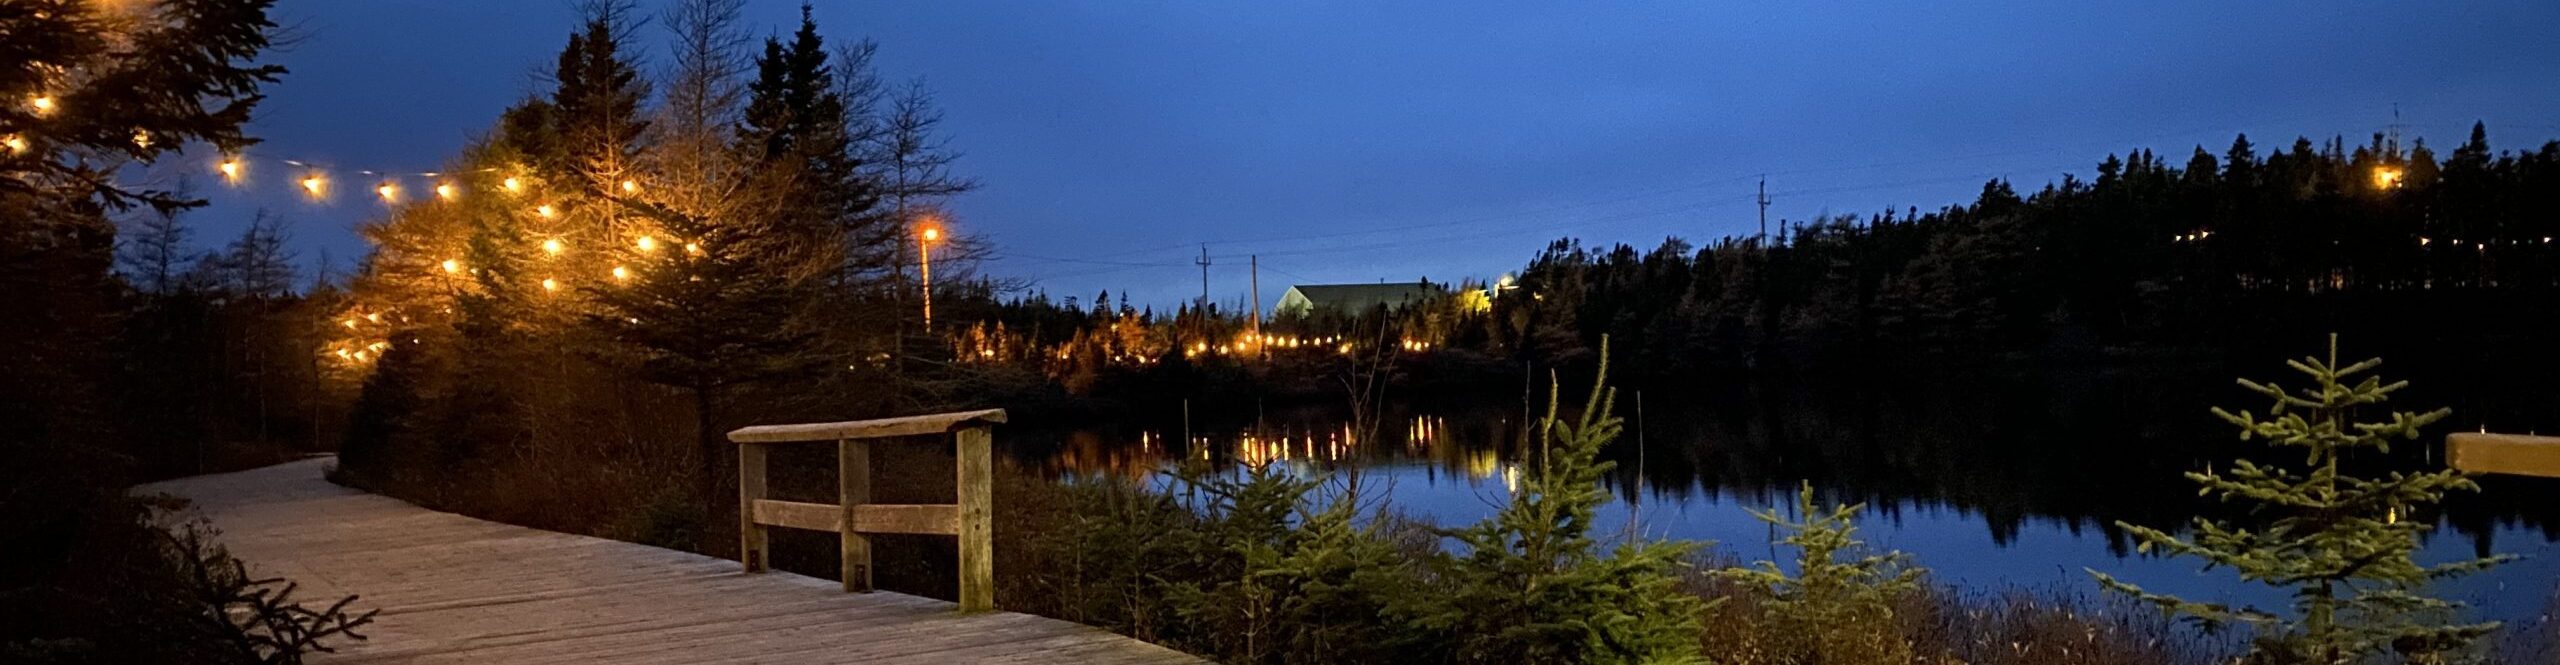 The boardwalk by Powers Pond, Mount Pearl, NL at night, lit by string lights.